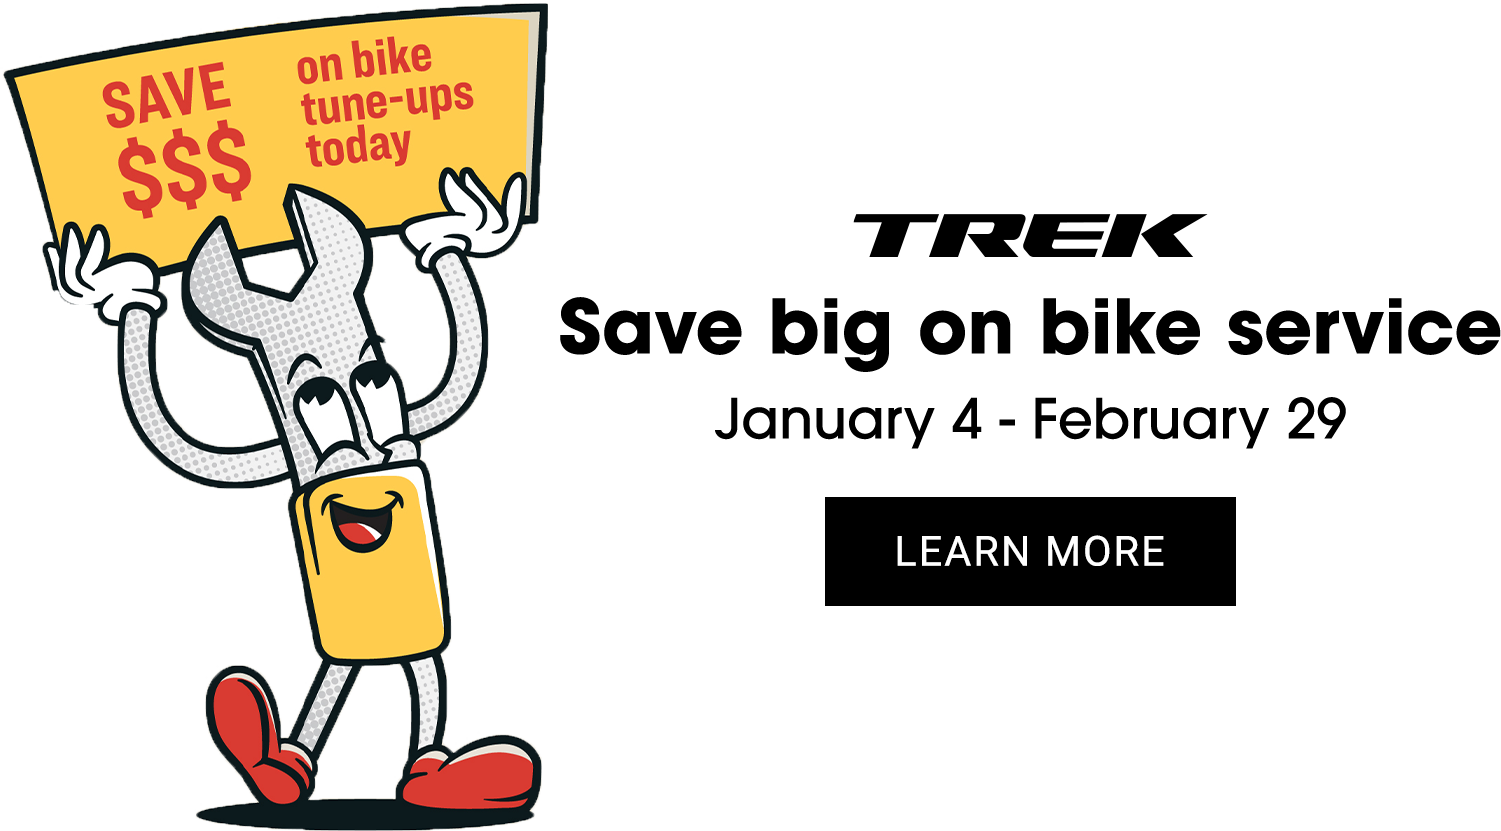 Trek Winter Service Special: Save Big On Bike Service: Learn More